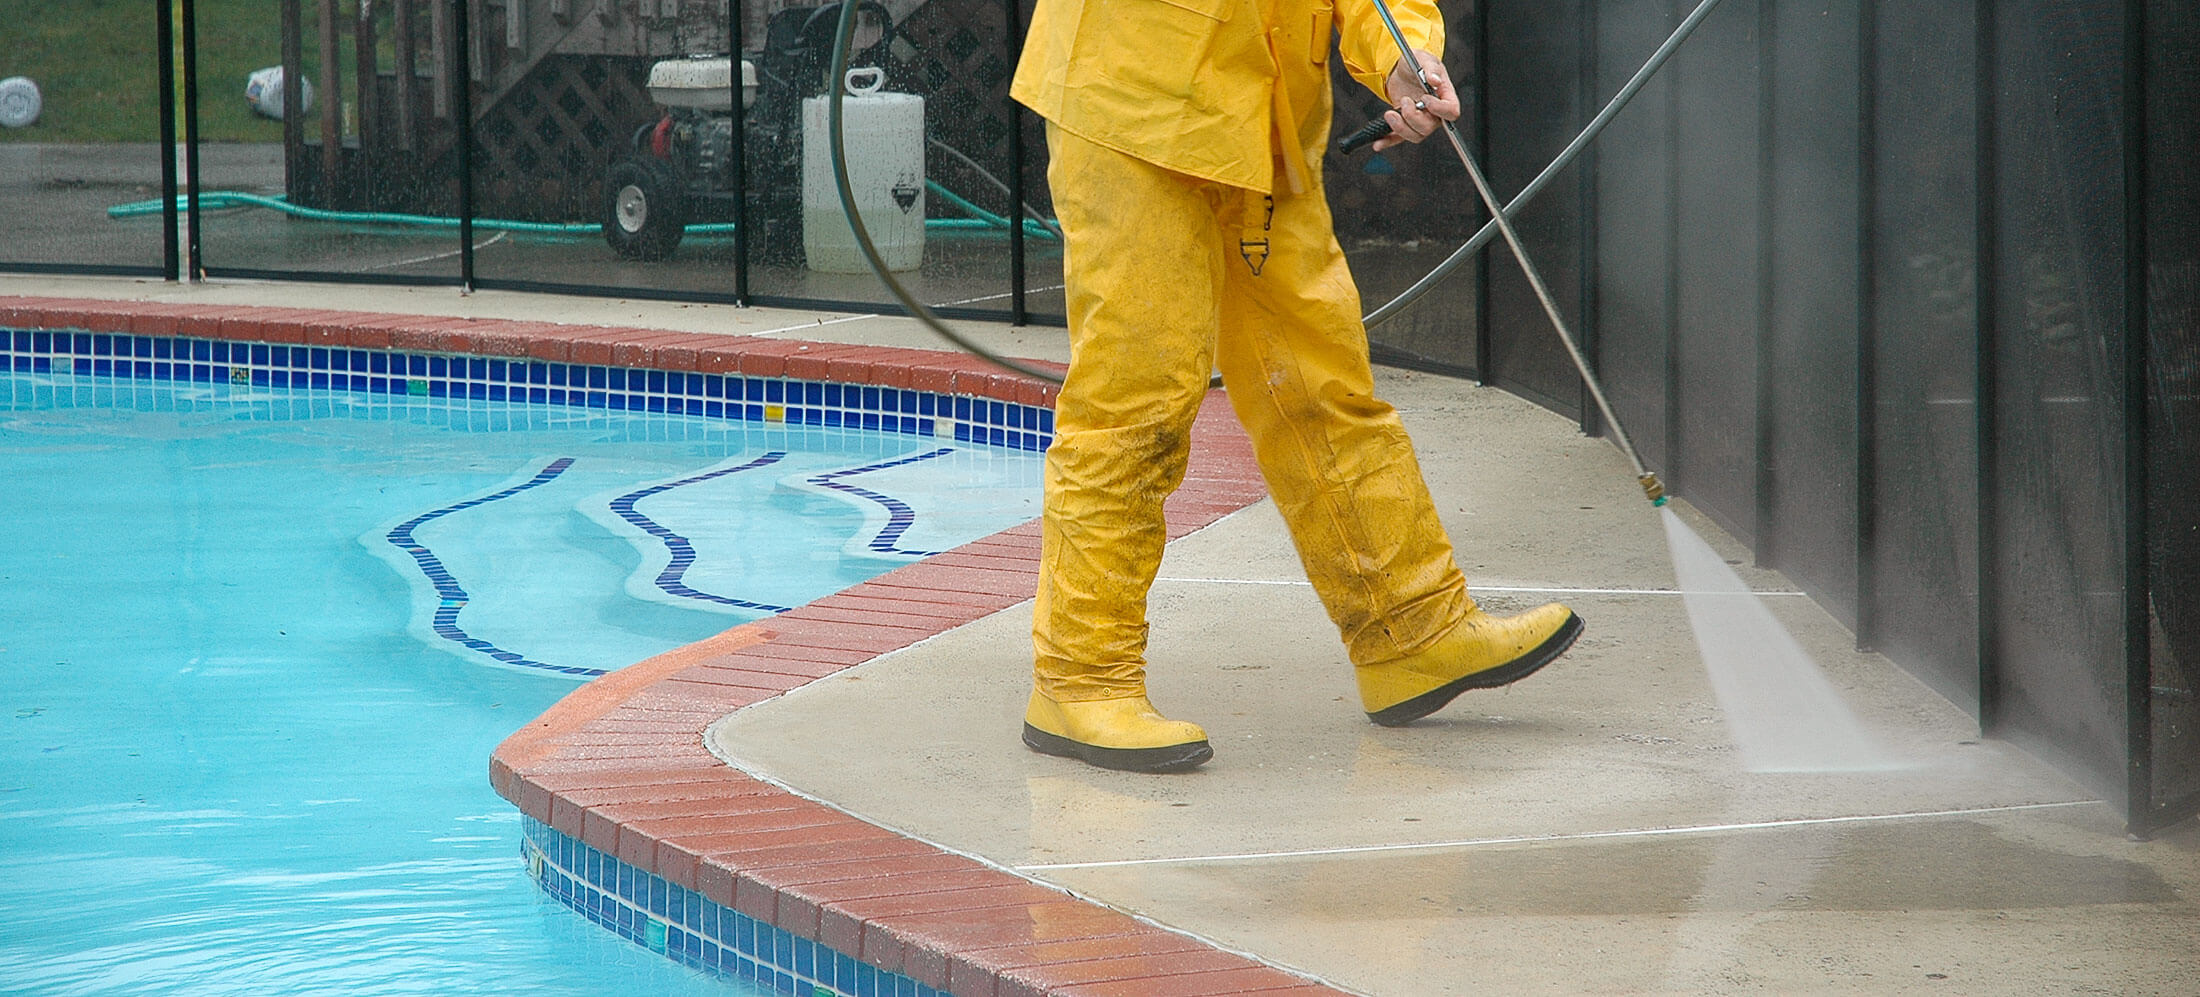 Spring Cleaning ~ Pool deck pressure cleaning services in Philadelphia and the surrounding area at John Neill Painting & Decorating